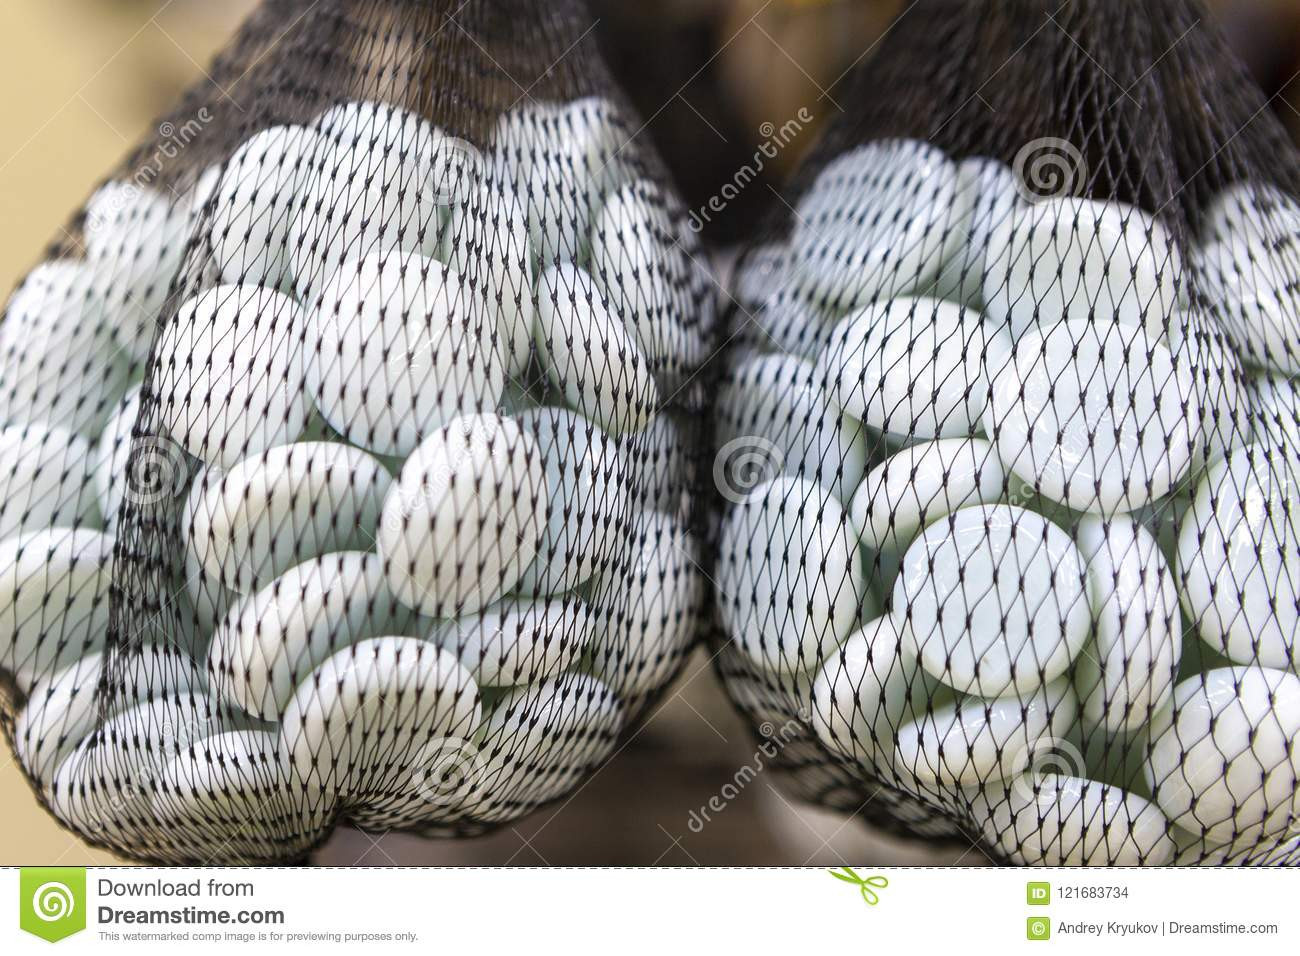 Decorative Glass Pebbles for Vases Of Flat Bright White Decorative Glass Stones In A Grid Stock Photo Inside Flat Bright White Decorative Glass Stones In A Grid Decoration for Aquariums Flower Pots Vases Close Up Shallow Depth Of Field